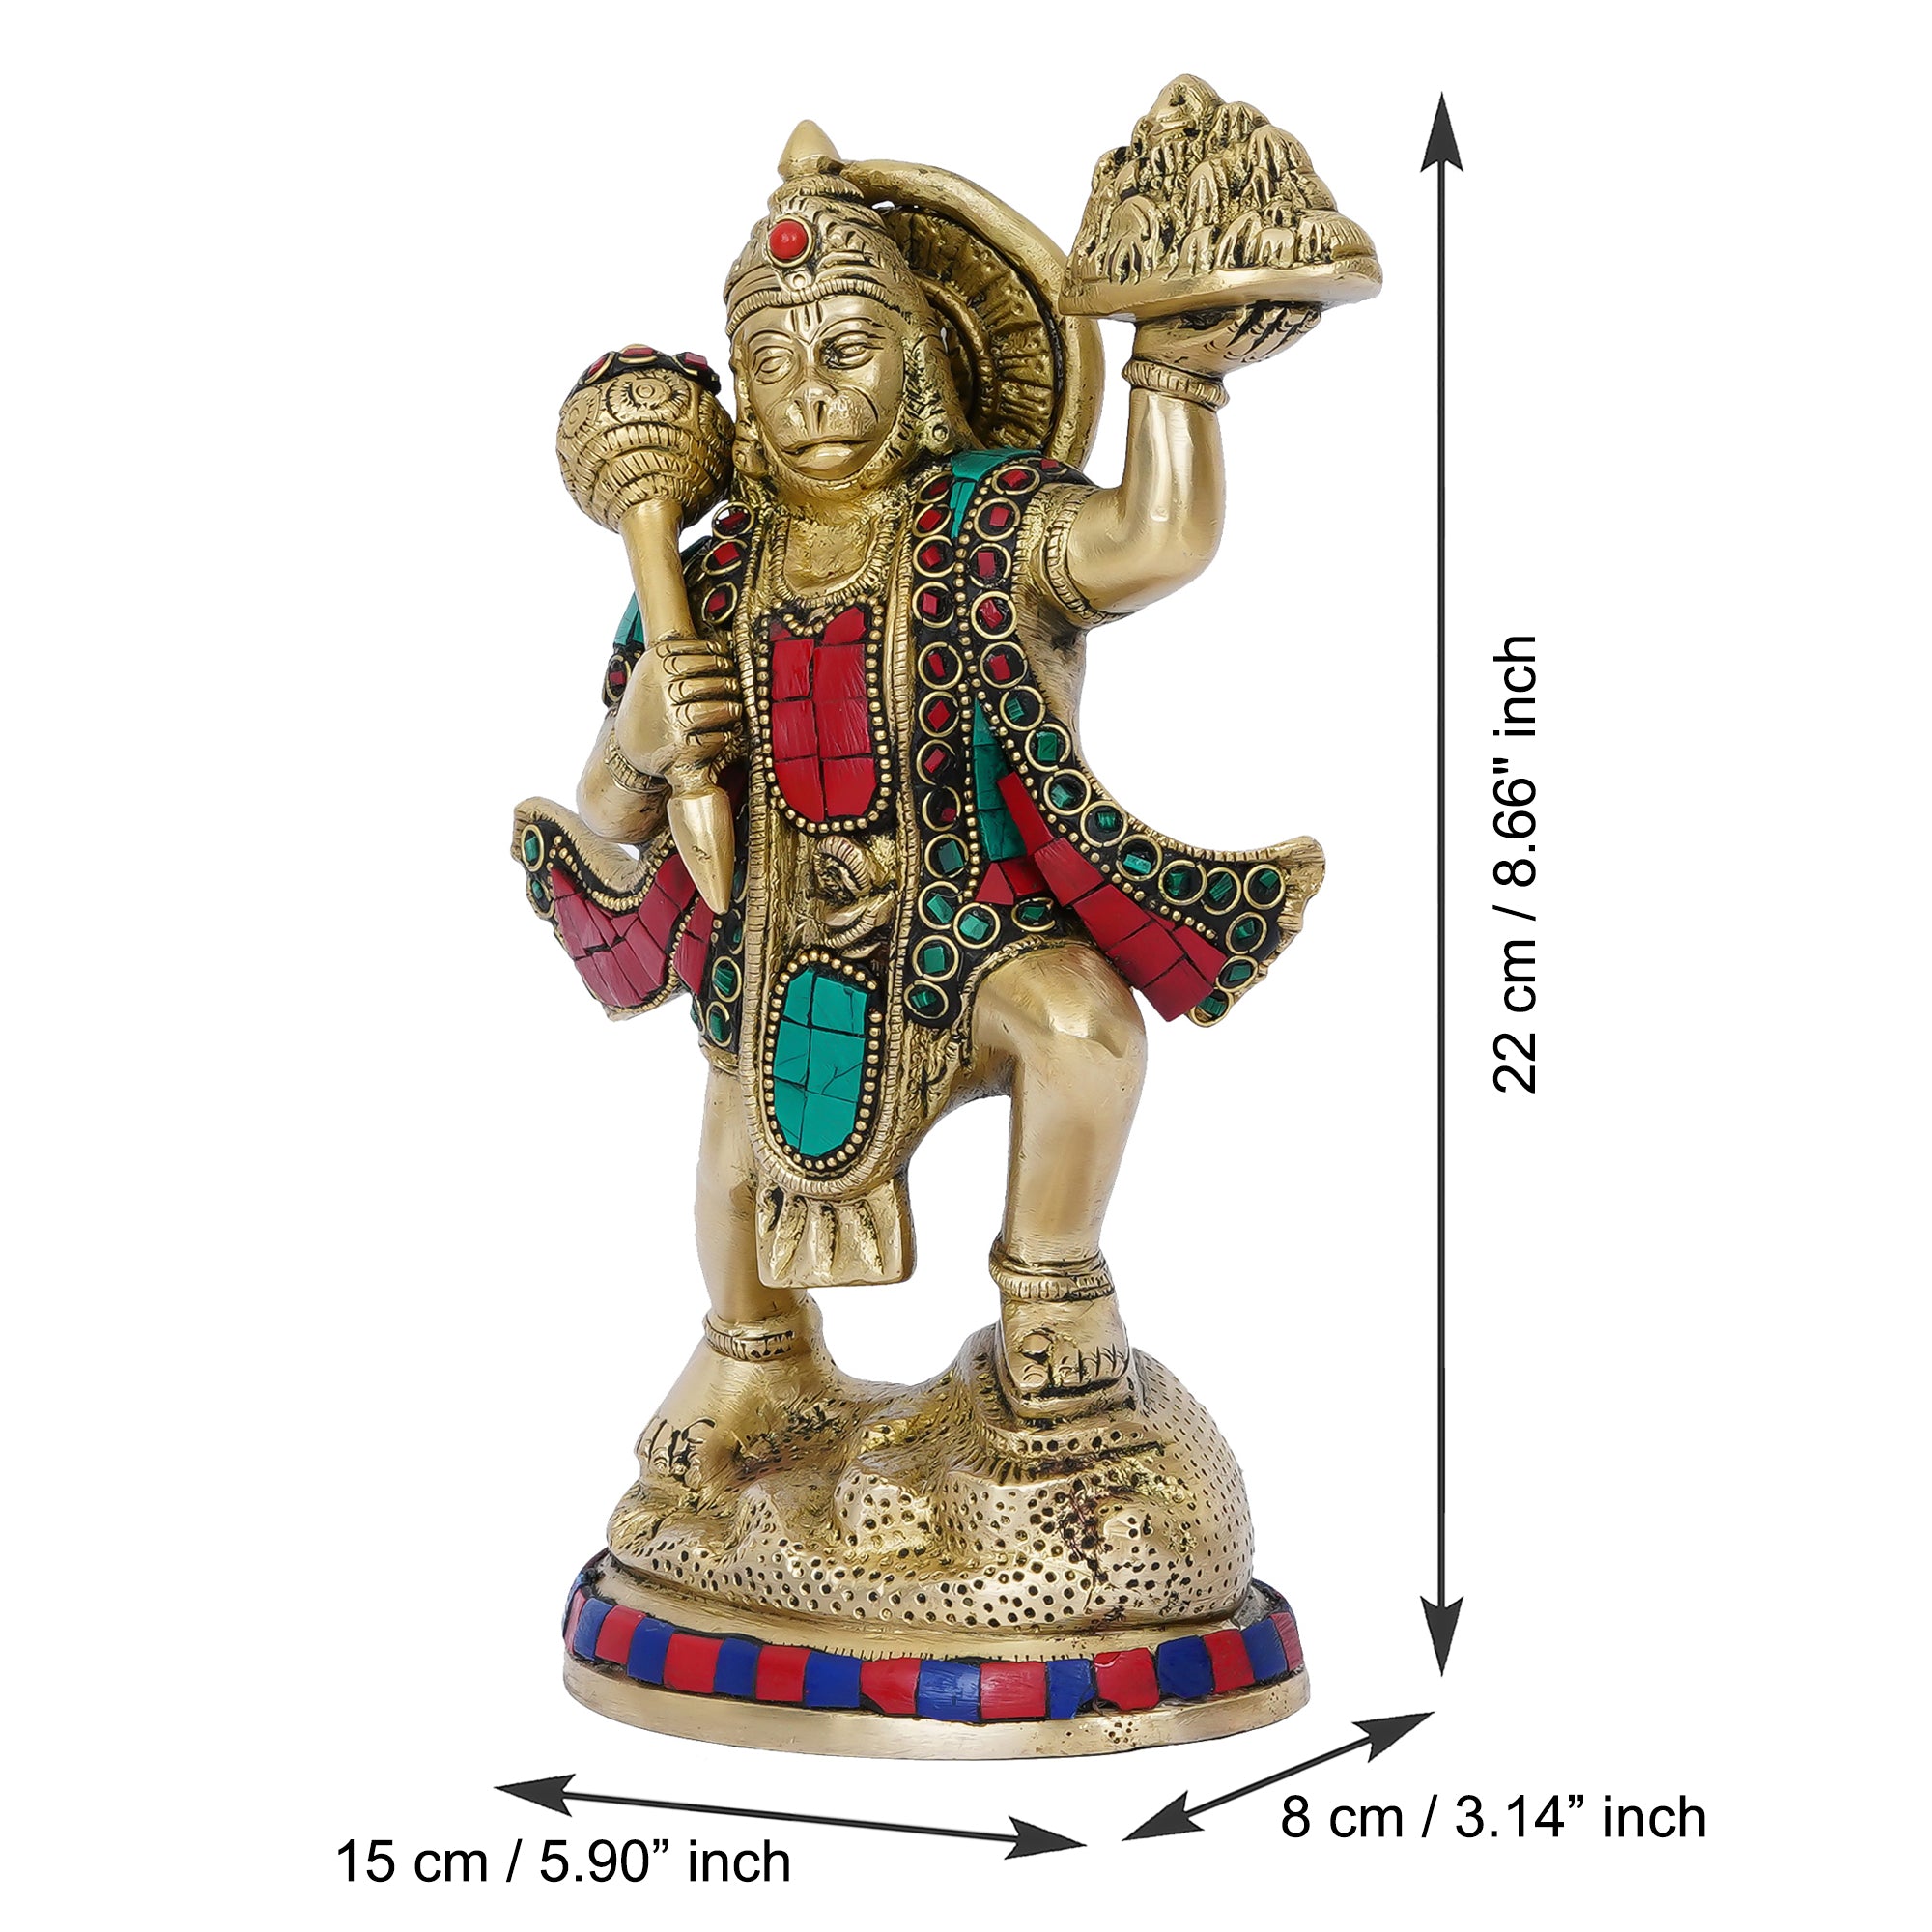 Colorful Stone Work Handcrafted Brass Lord Hanuman Statue Carrying Sanjeevani Mountain 3